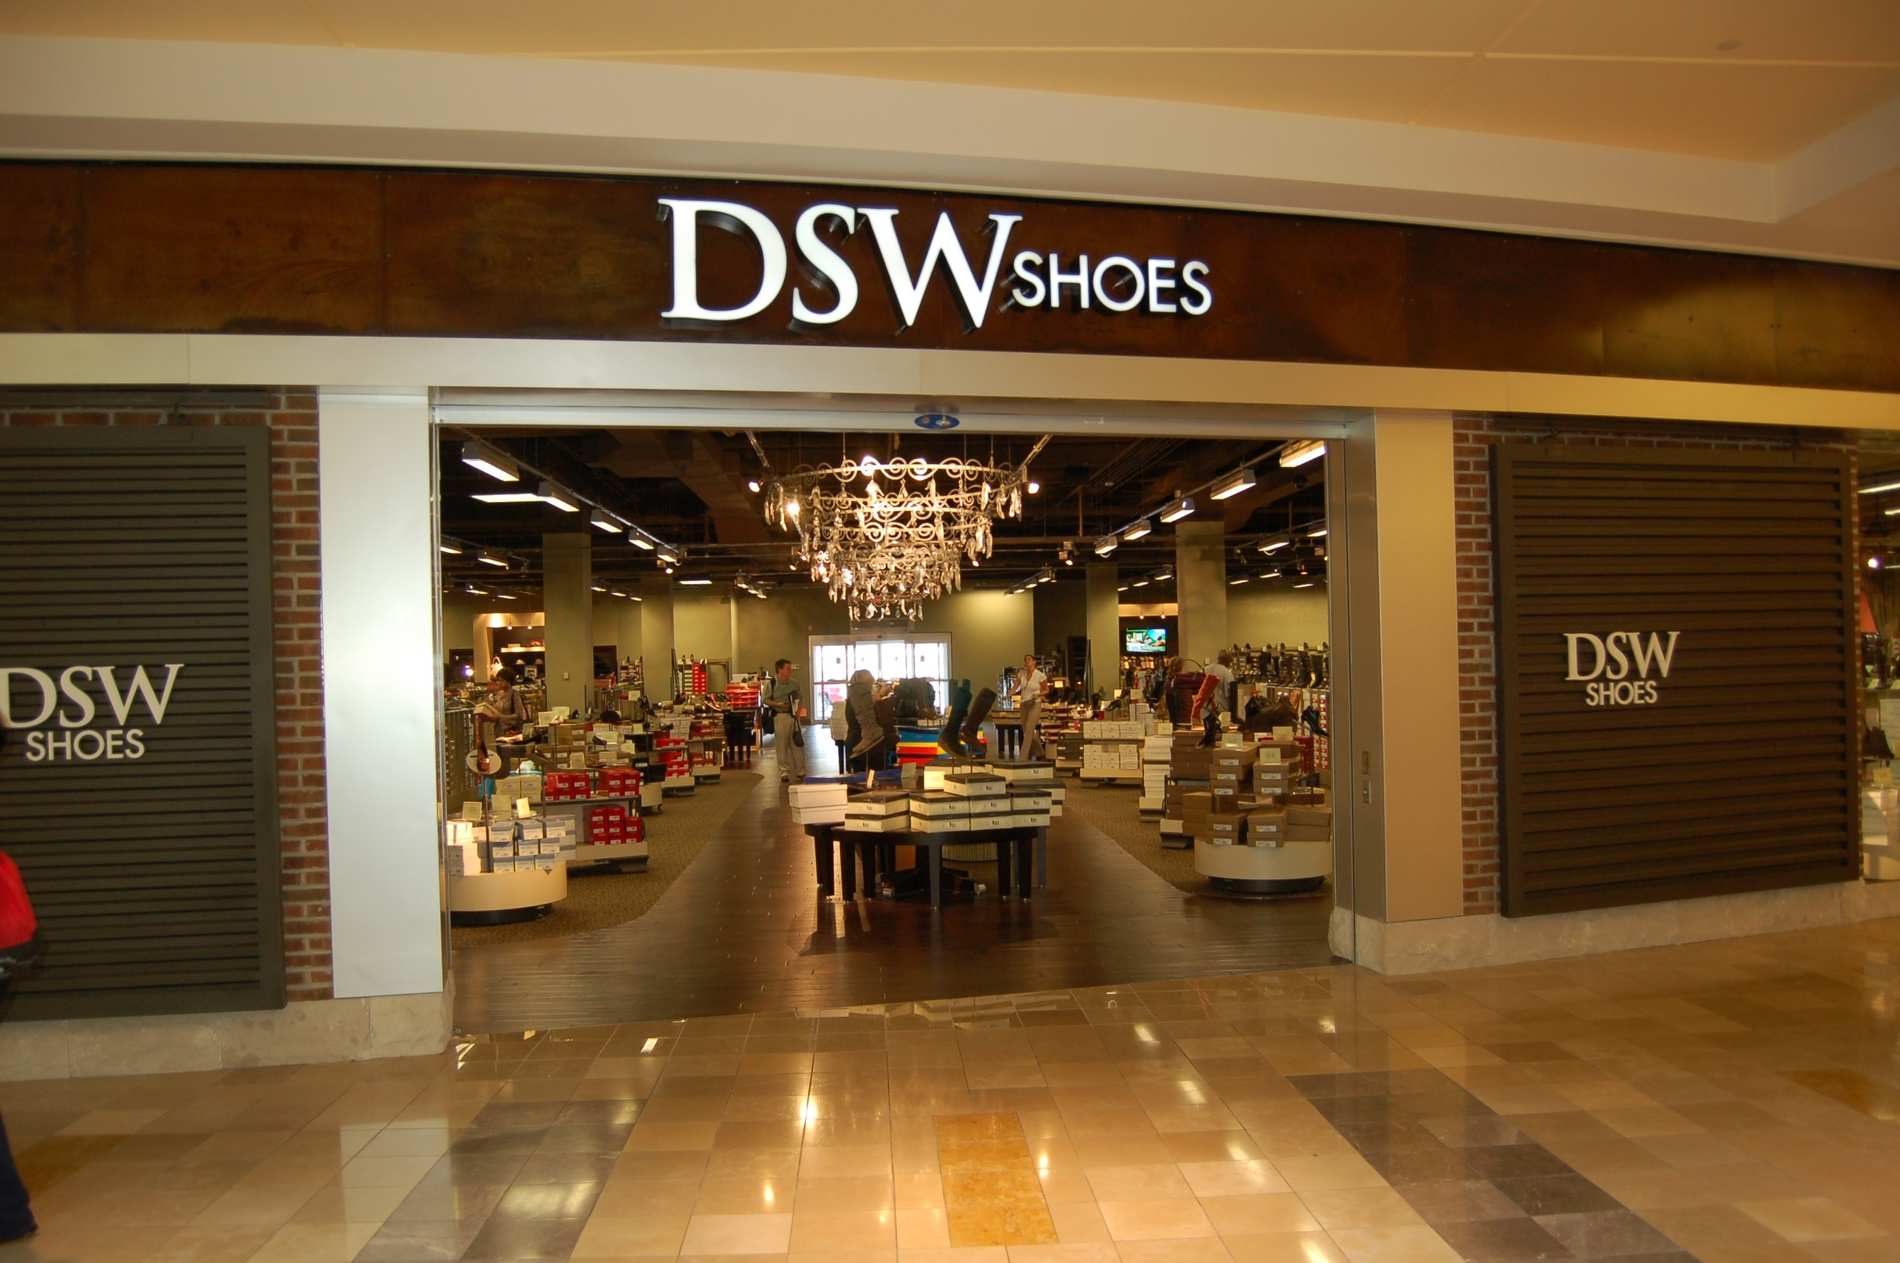 DSW Black Friday 2020 Deals, Sales & Ads- 70% Off - OveReview